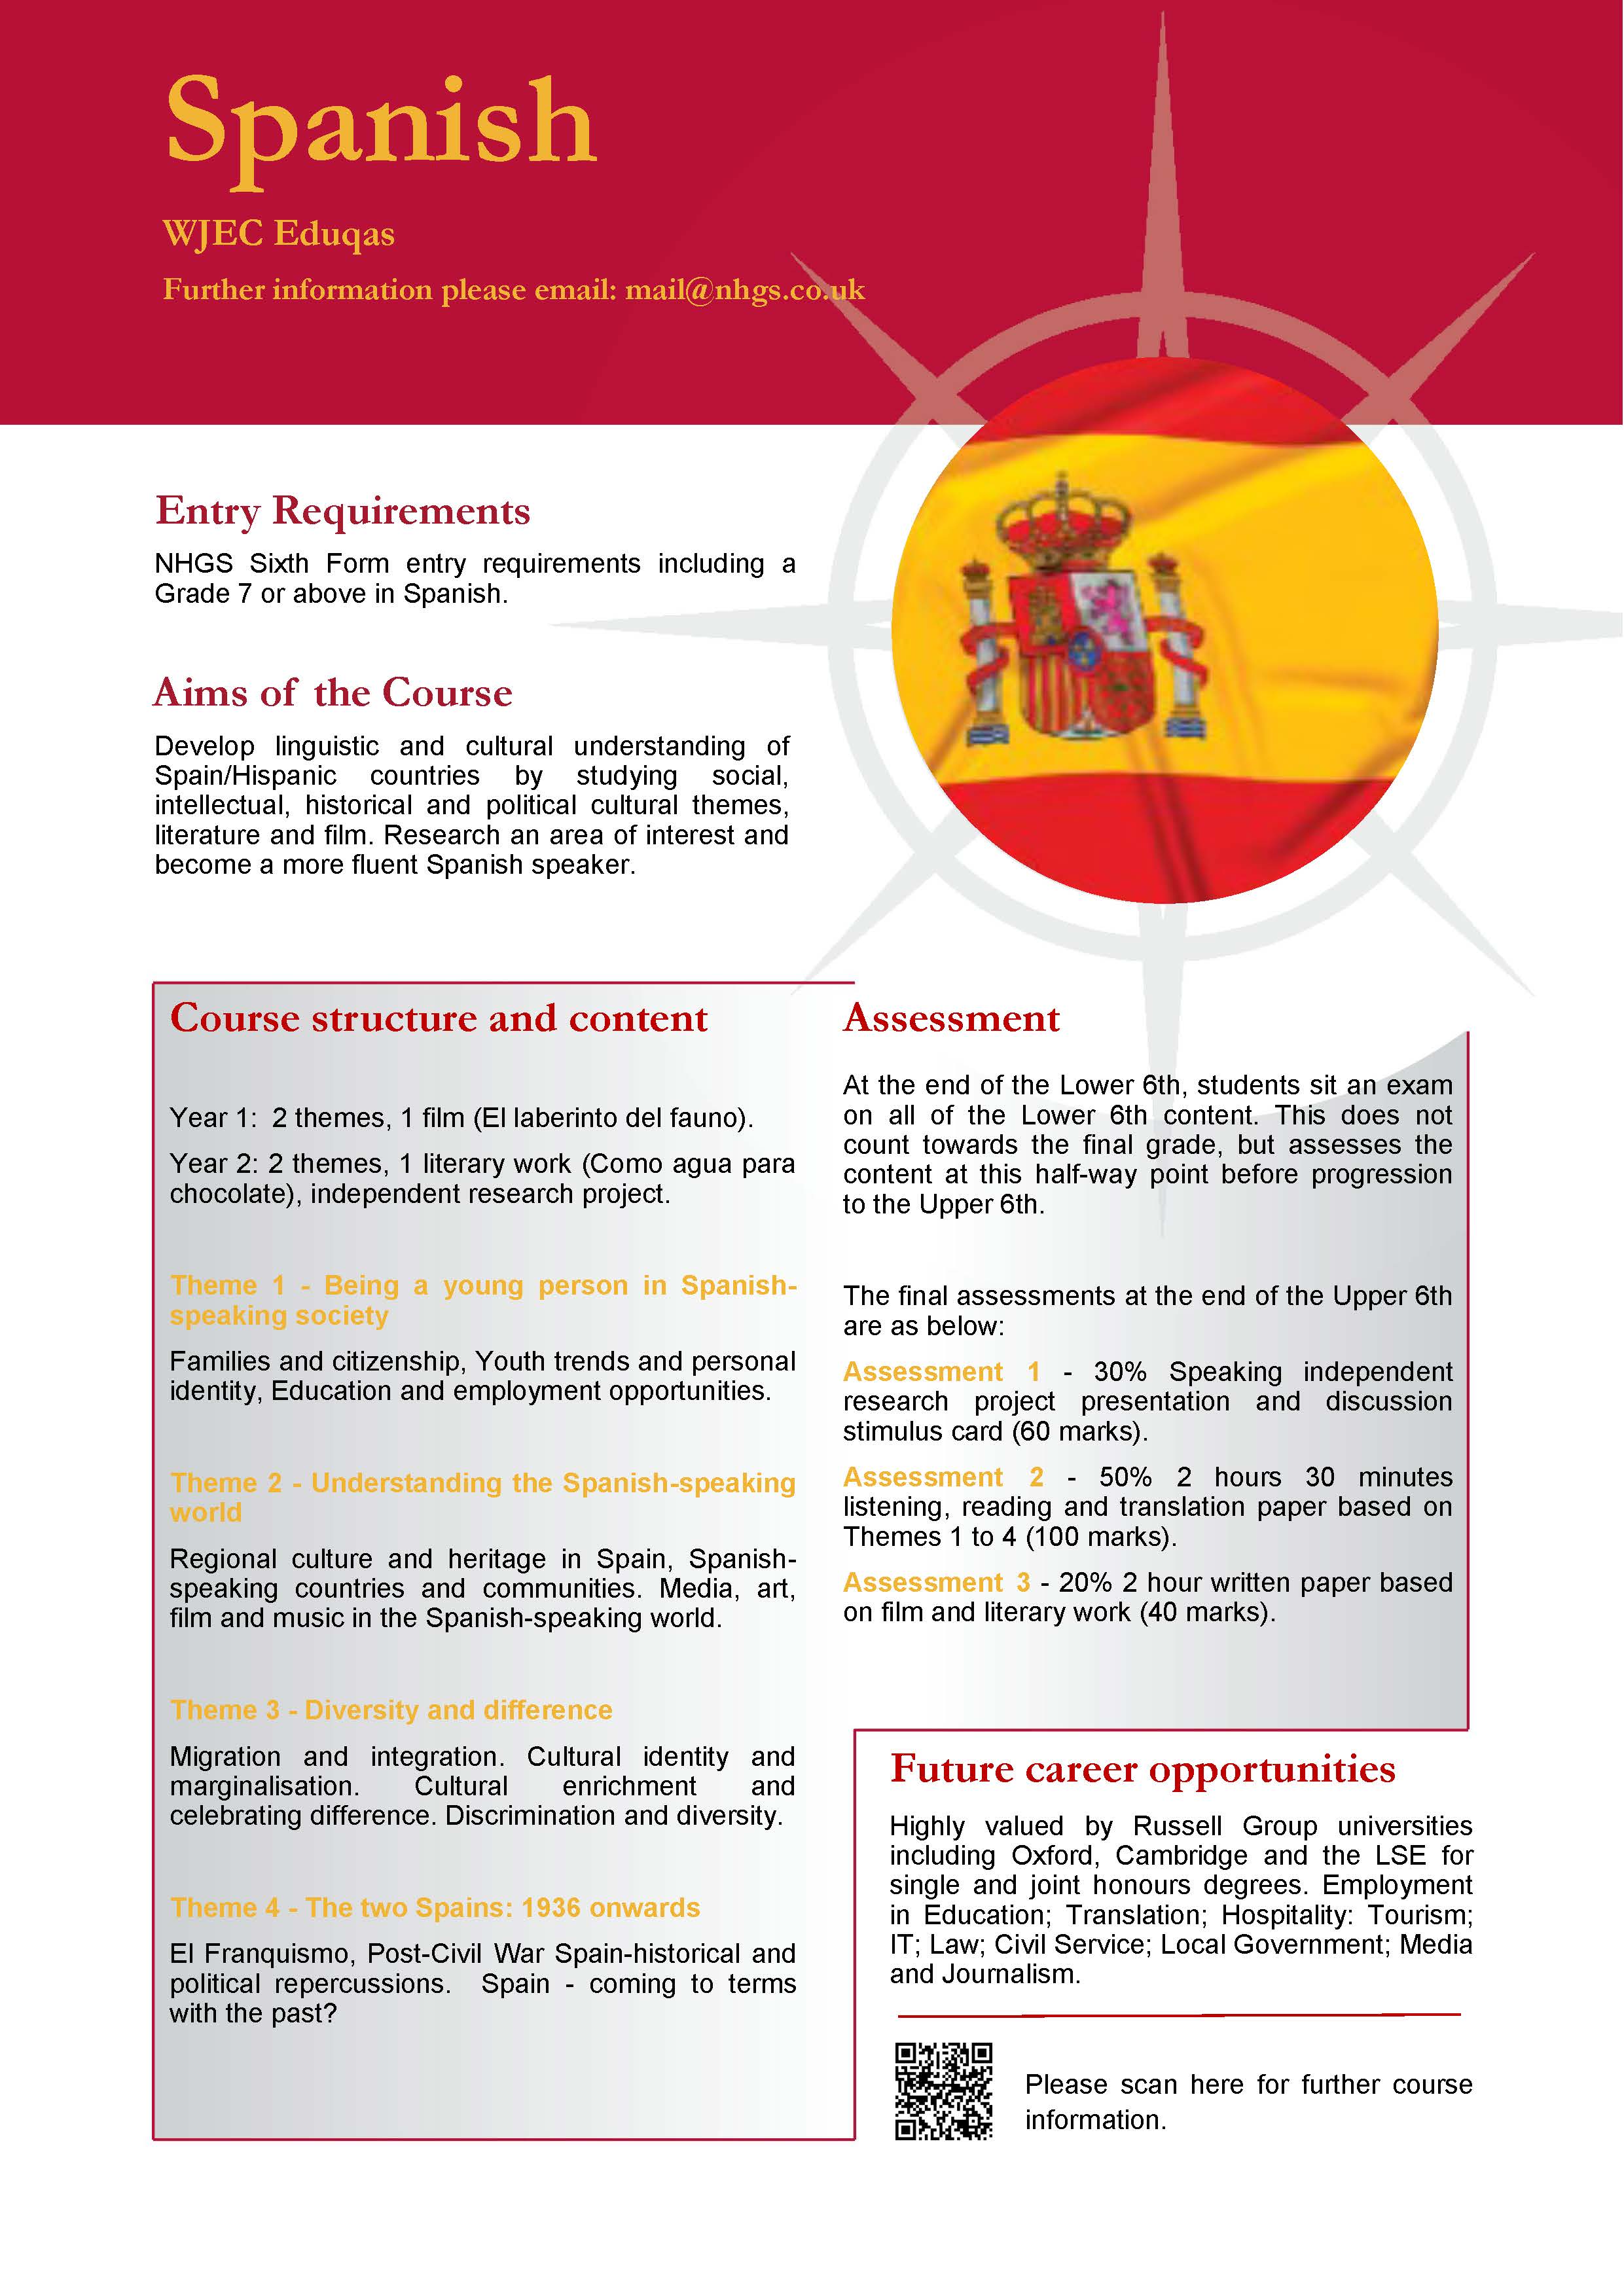 Spanish A Level Course Flyer, NHGS Sixth Form